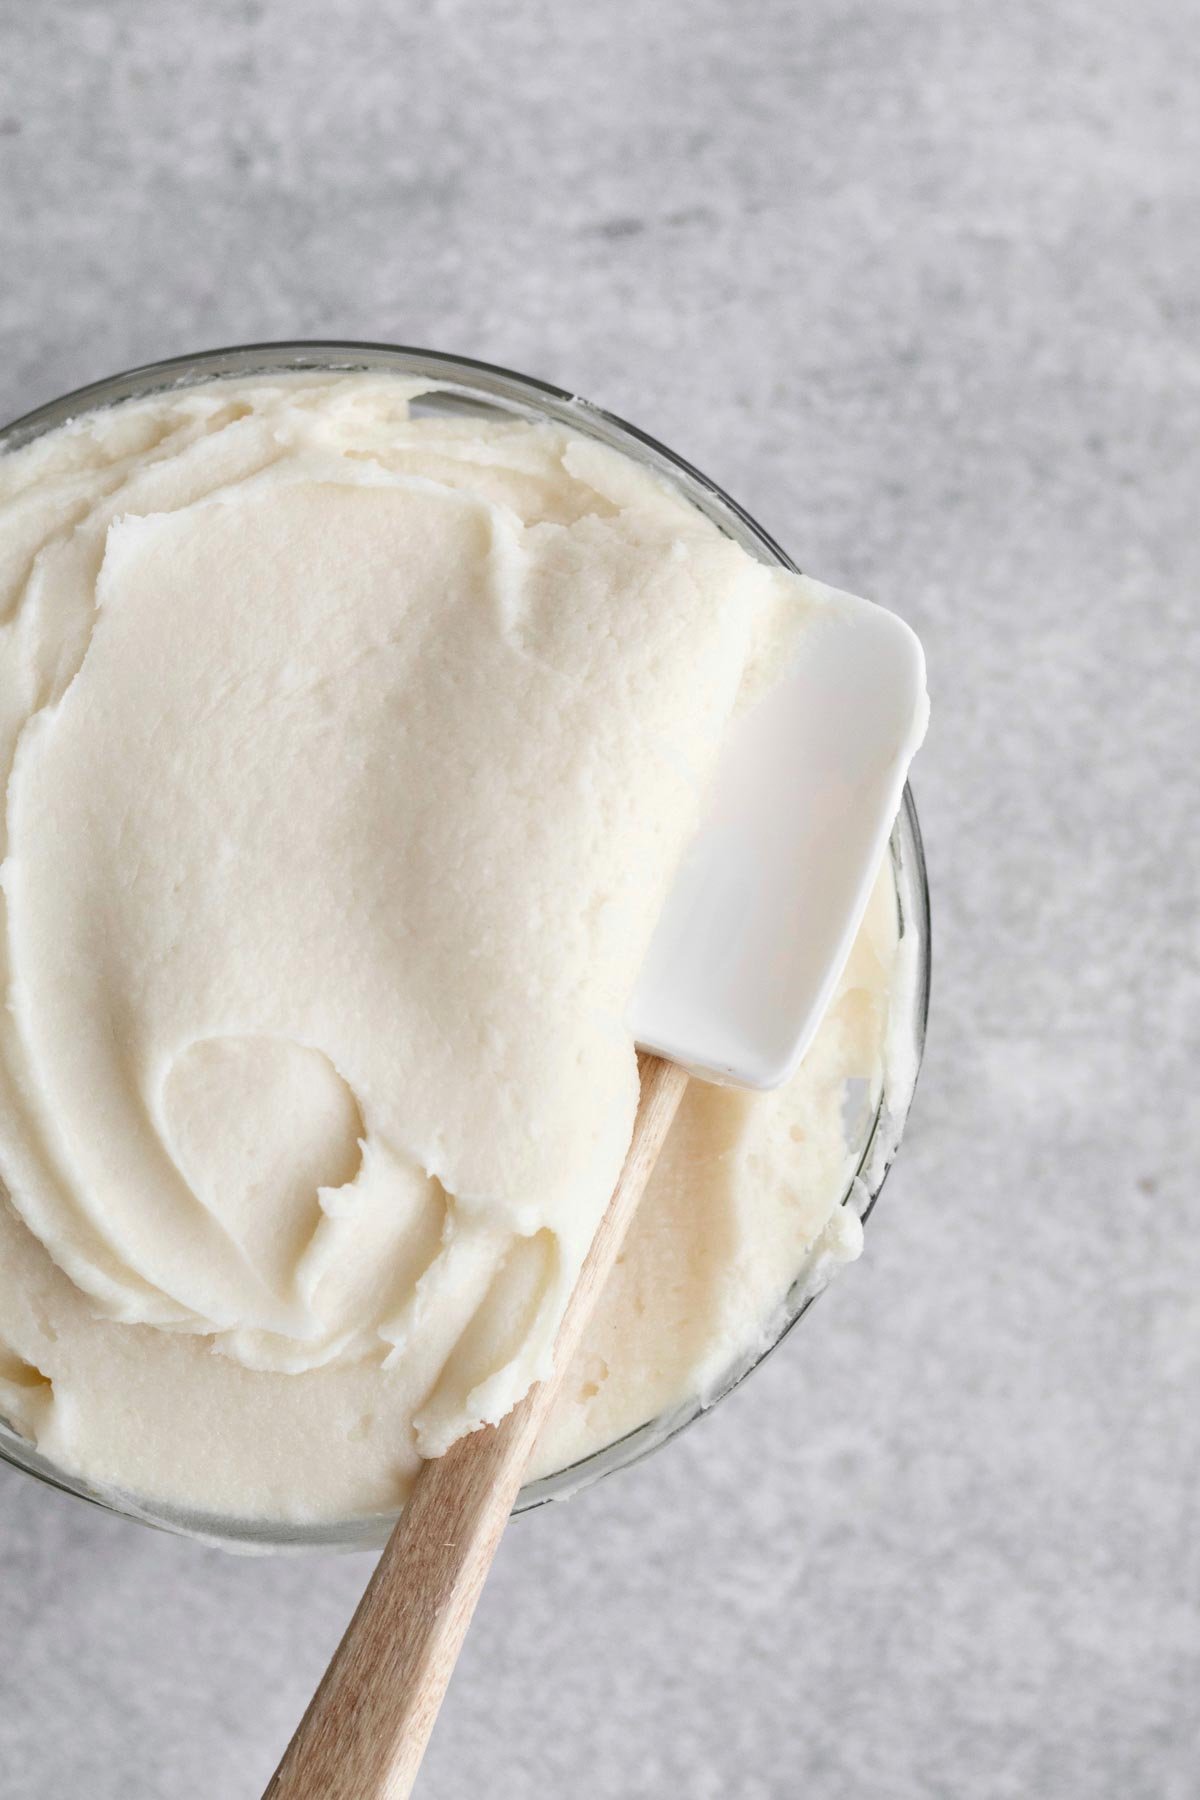 Mixing everything into a smooth creamy frosting.